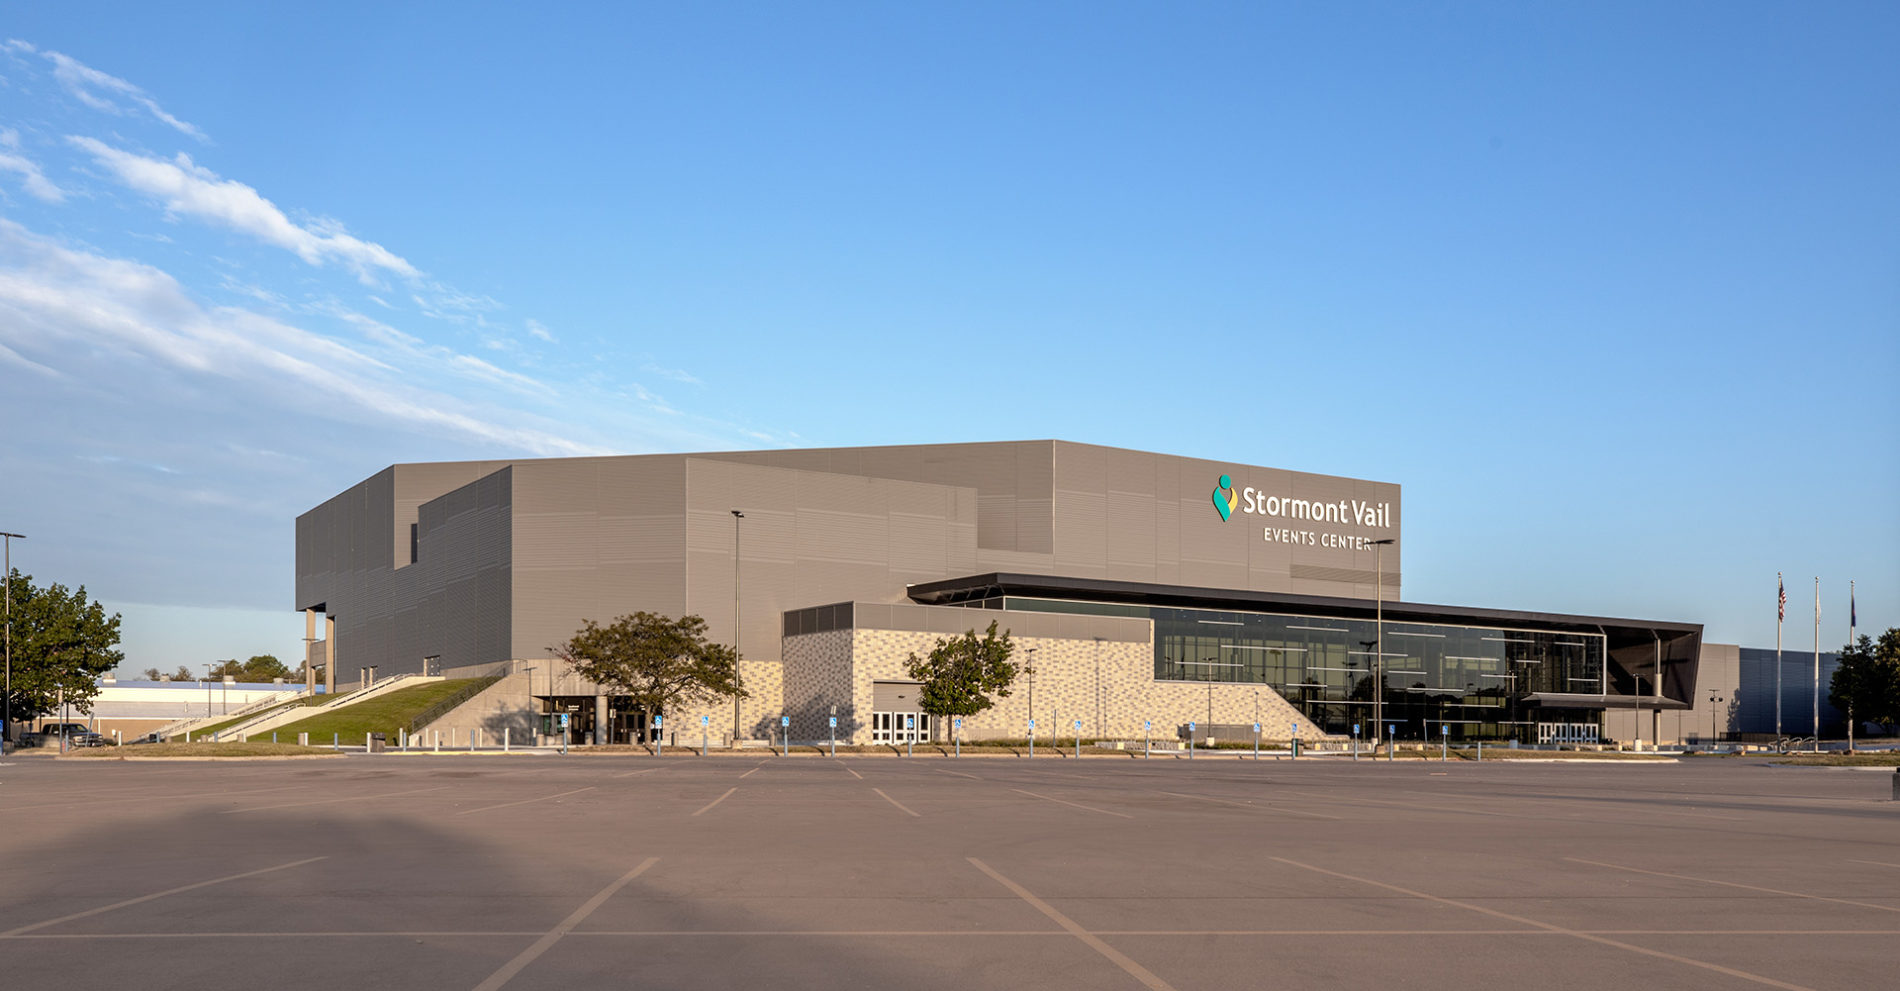 Kansas Expocentre Building Additions and Renovations